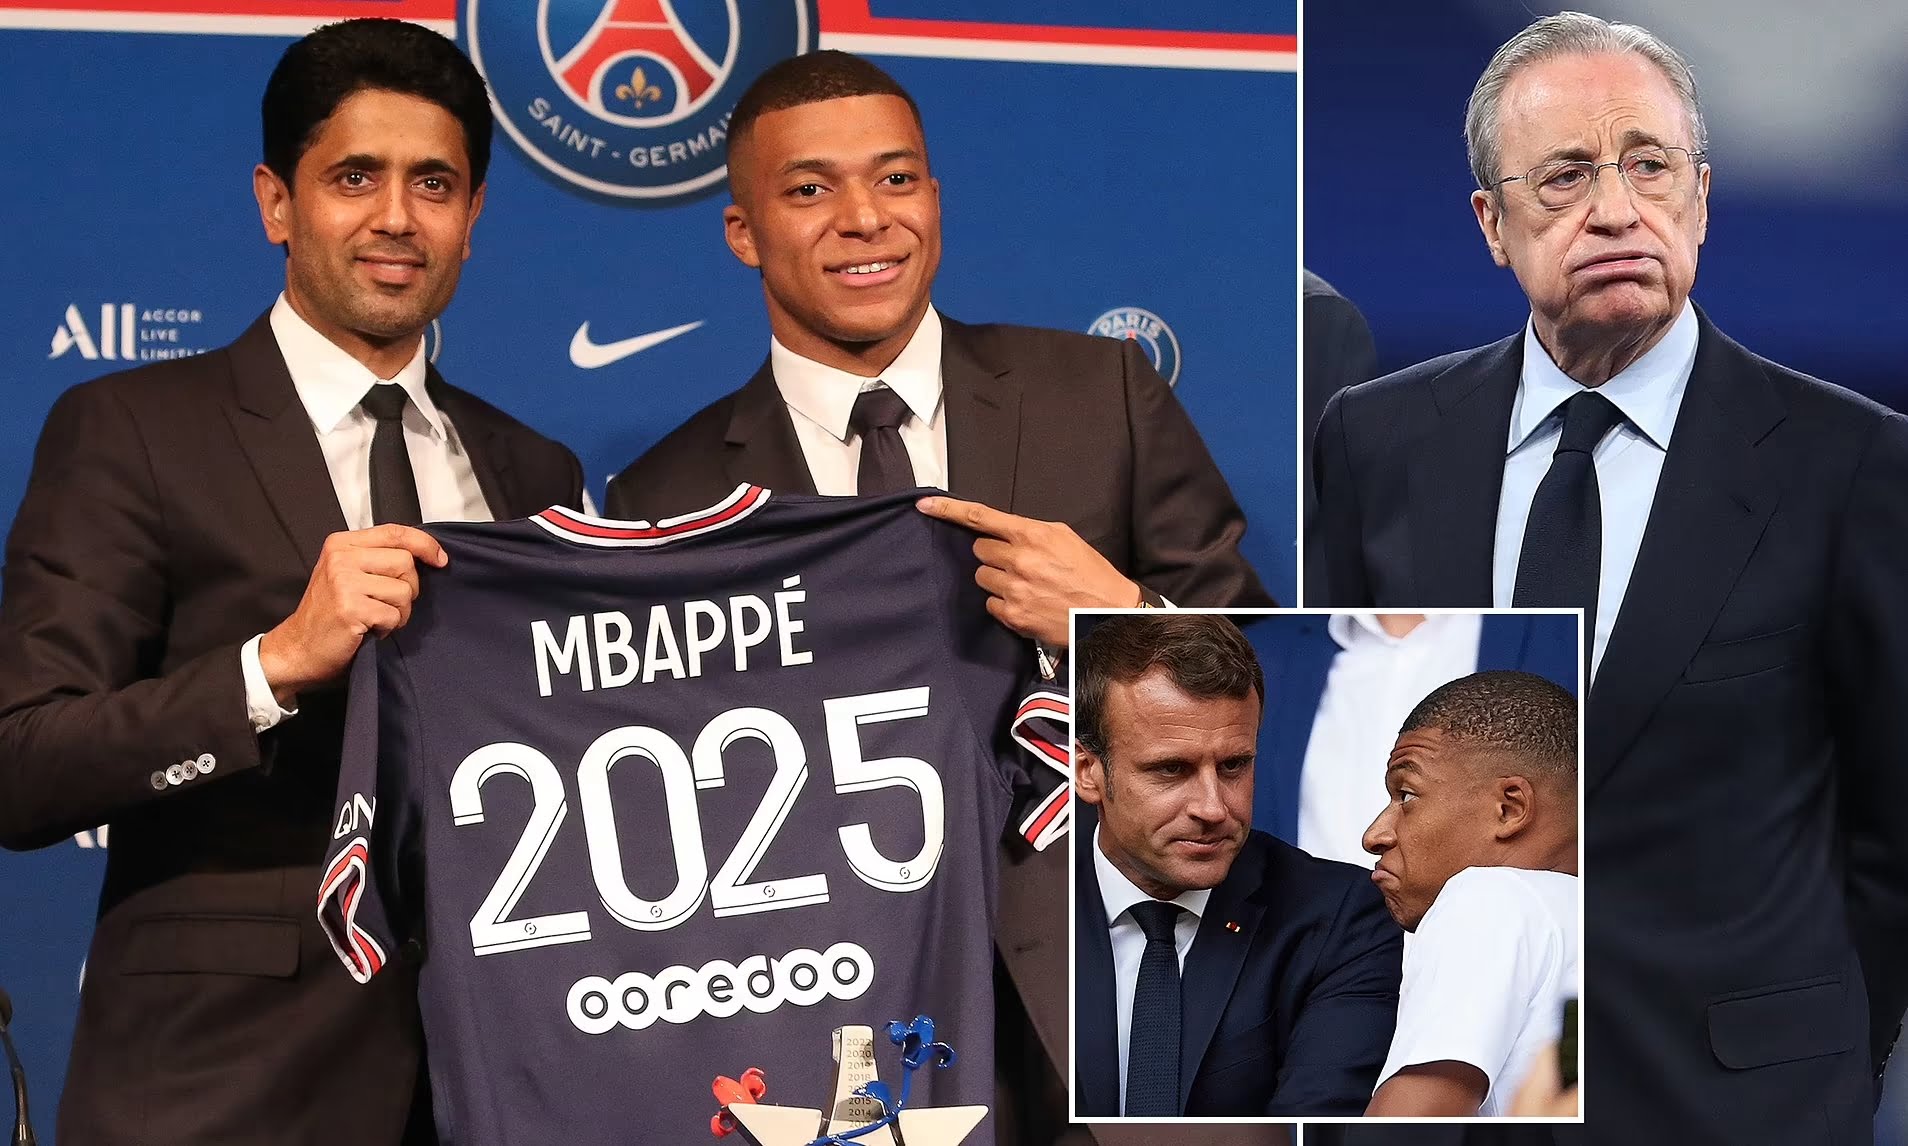 The Saga of Kylian Mbappé - Will he stay at PSG or will he go to Real Madrid? - Media7